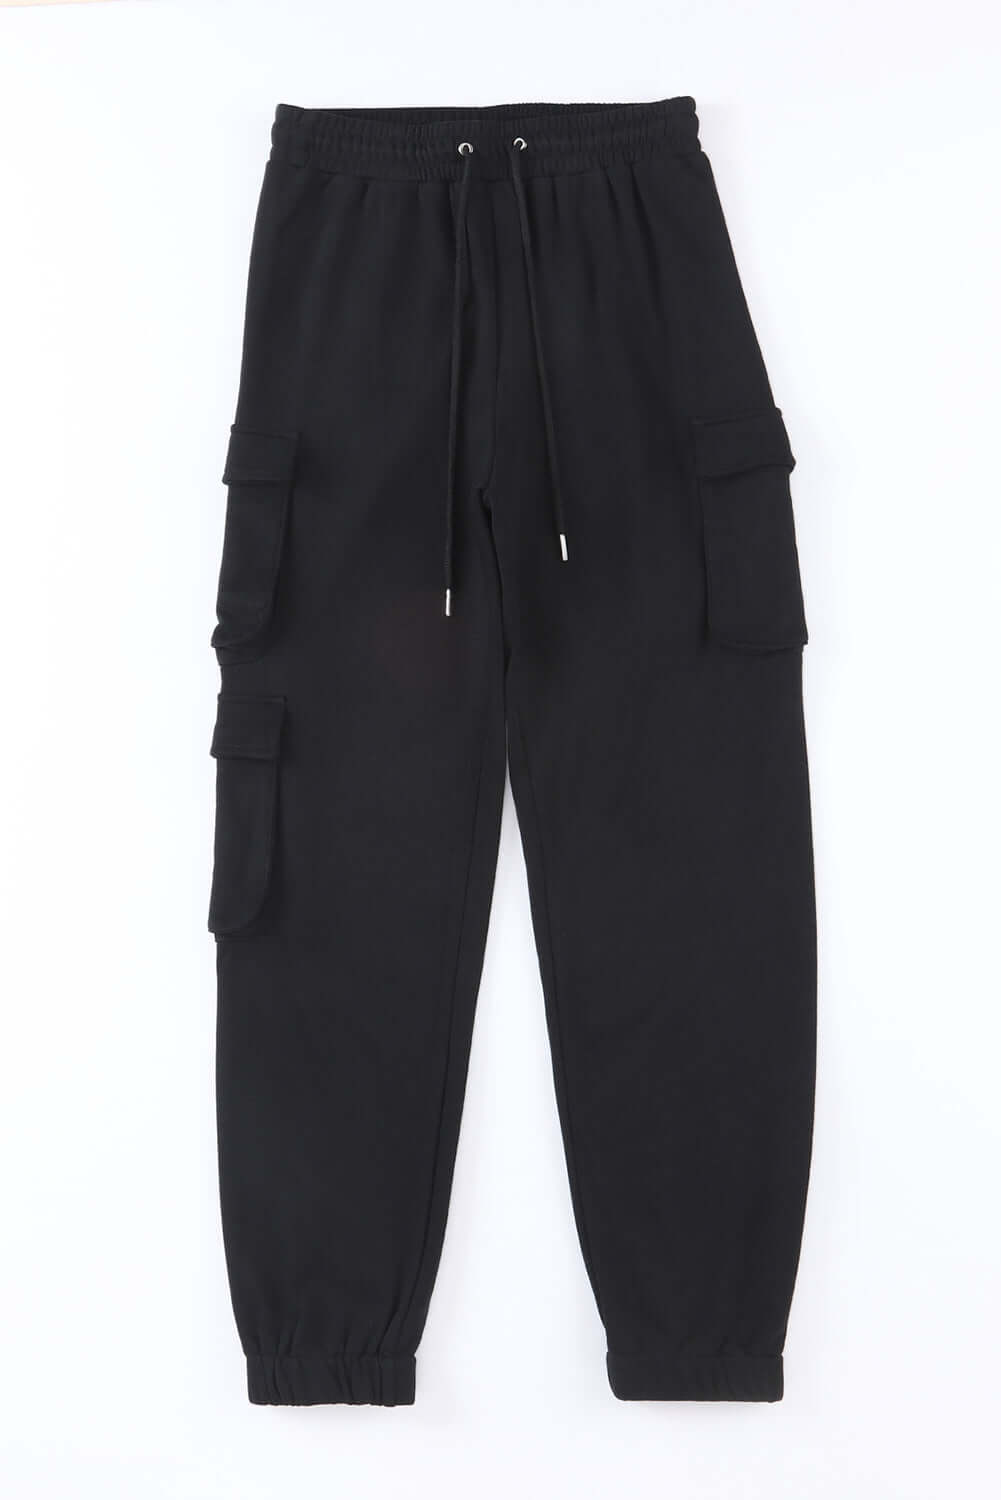 Black Drawstring Jogger Pants with Cargo Pockets - Dixie Hike & Style